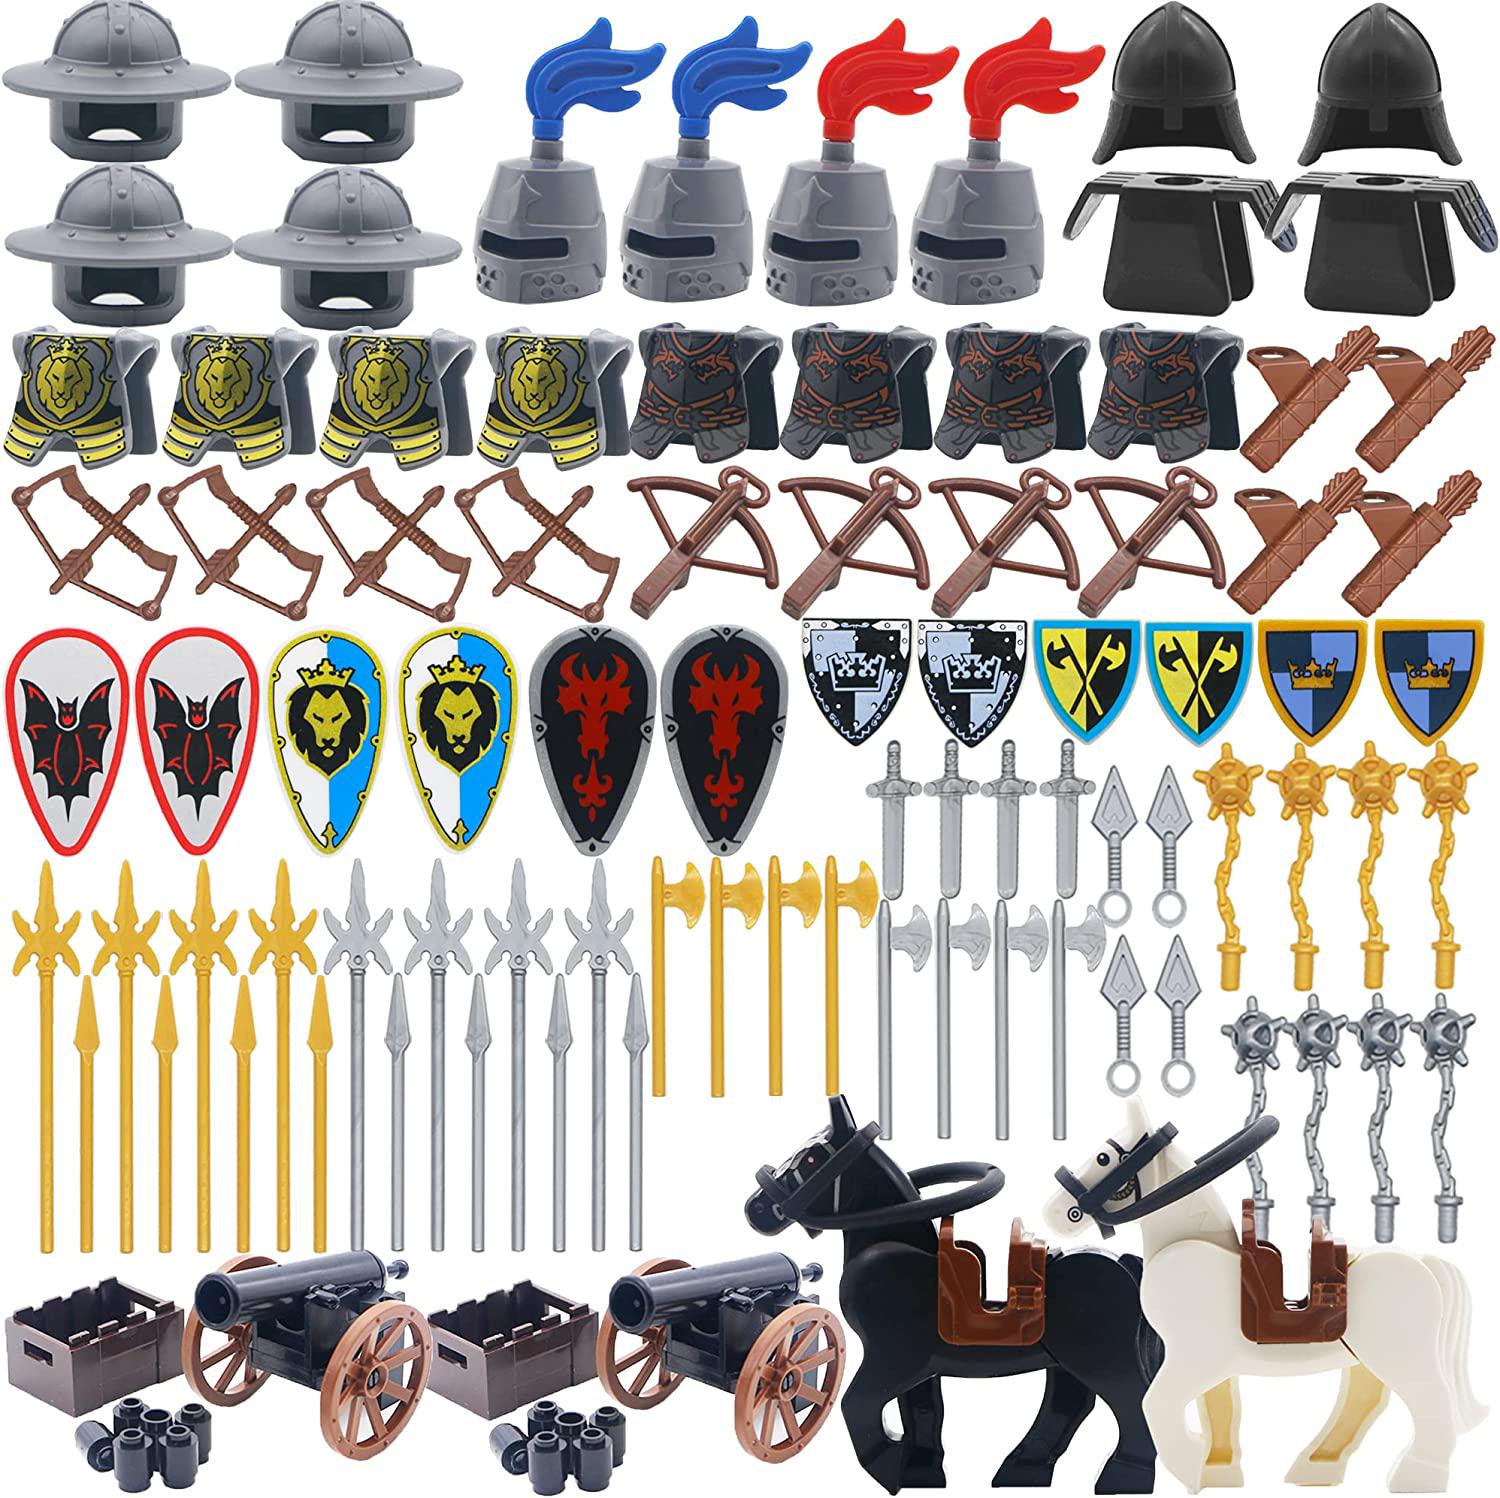 BroTex, Knights People Accessories Building Block - Medieval Weapon Armor Swords Helmet Horse, Castle Knight Shield Spear, MOC Bricks Parts Toys Sets for Boys